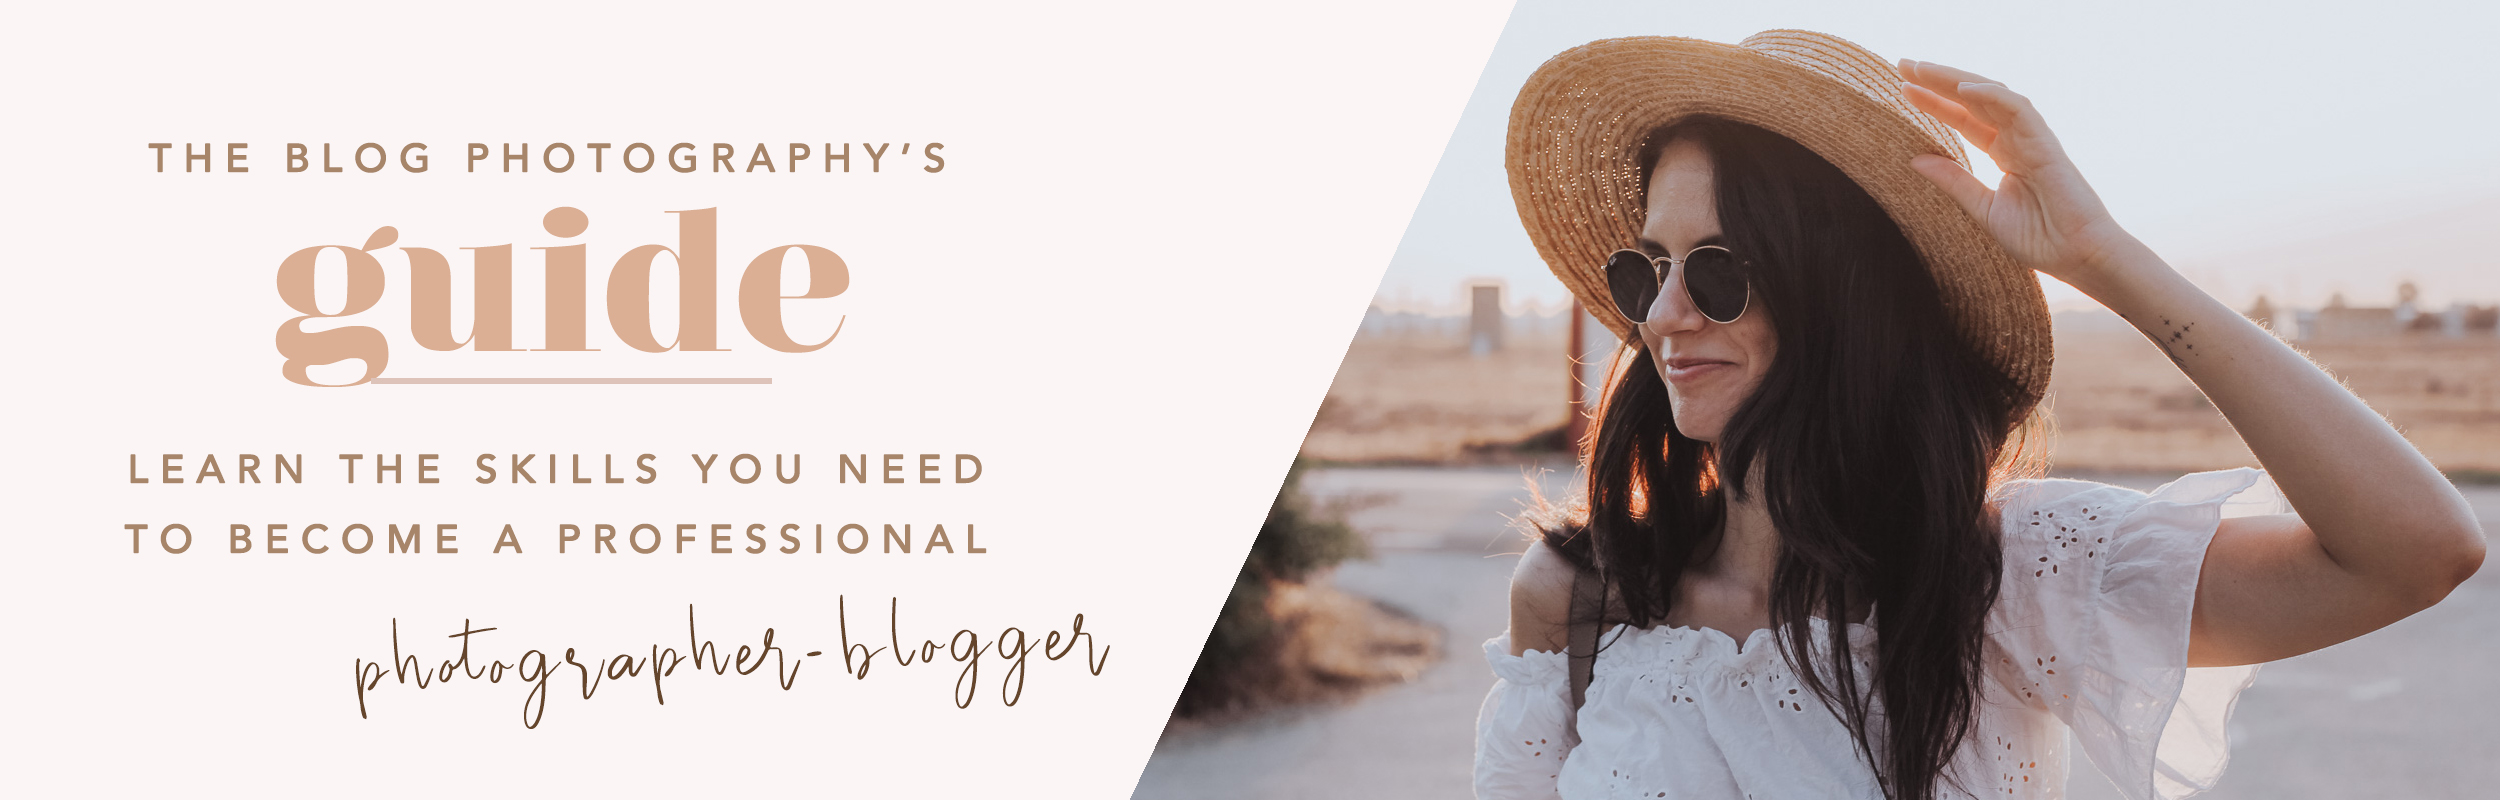 Blog Photography Guide to become a professional blogger photographer